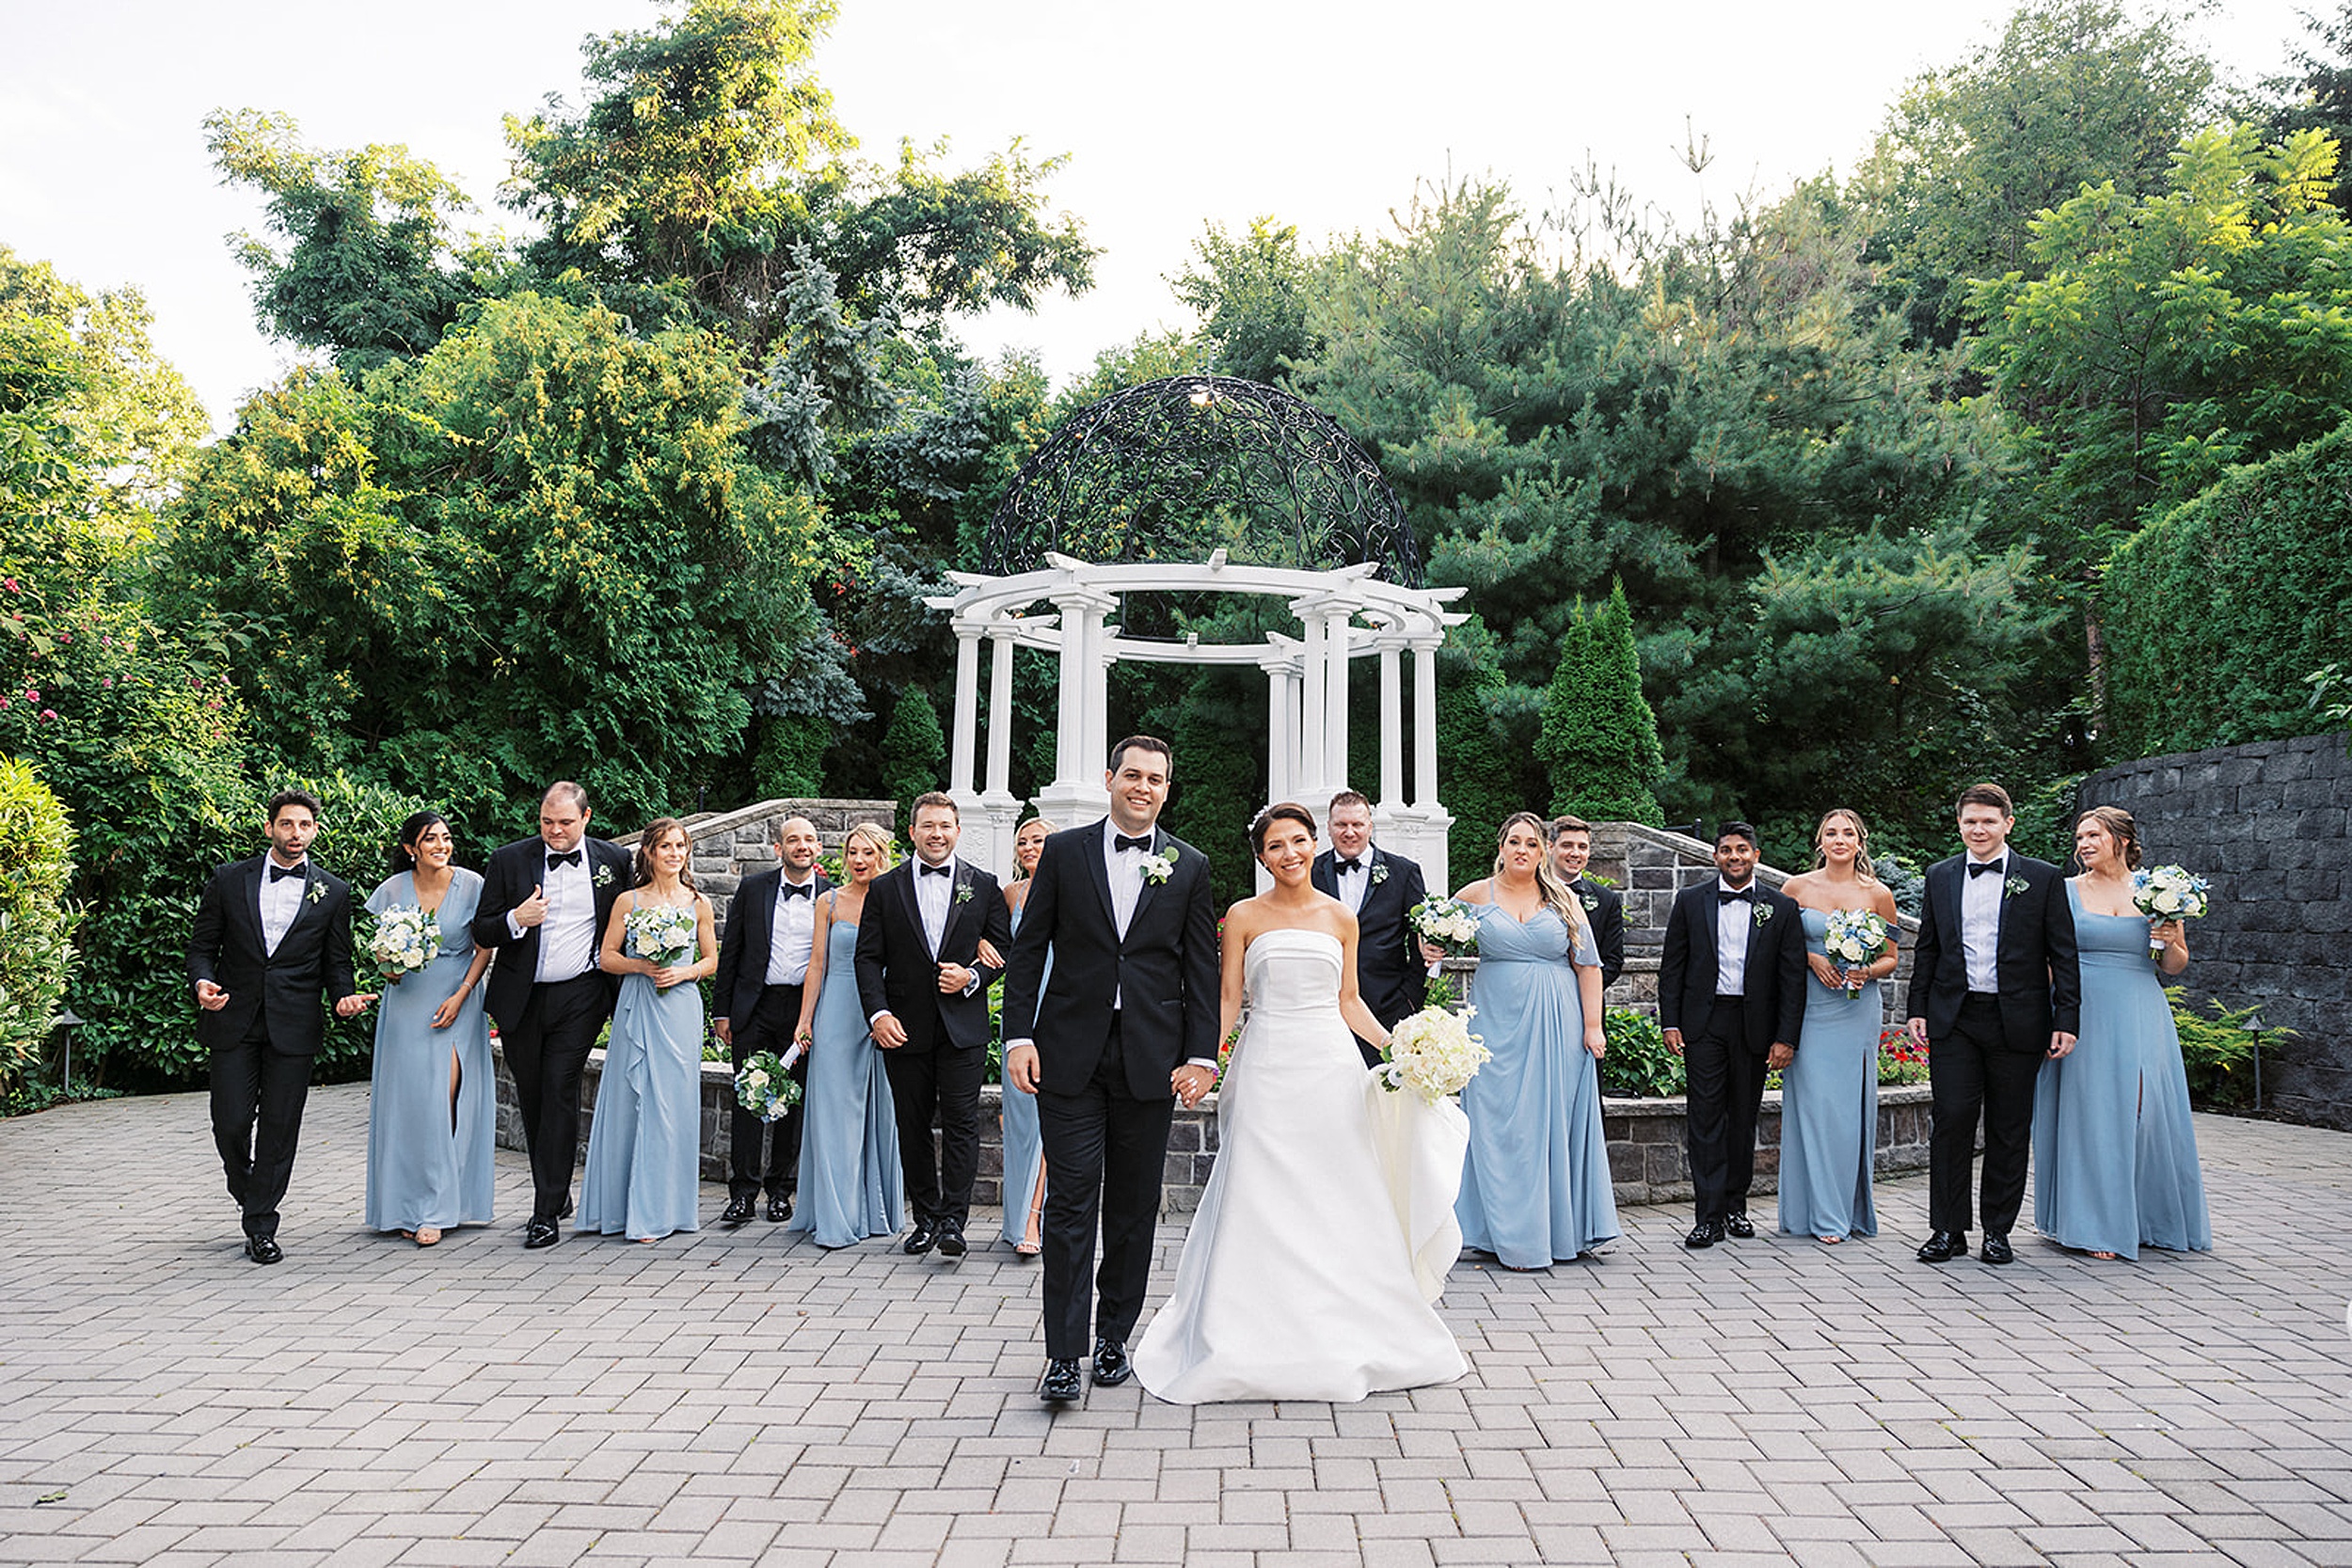 Newlyweds hold hands while walking through a garden surrounded by their large wedding party in black suits and blue dresses